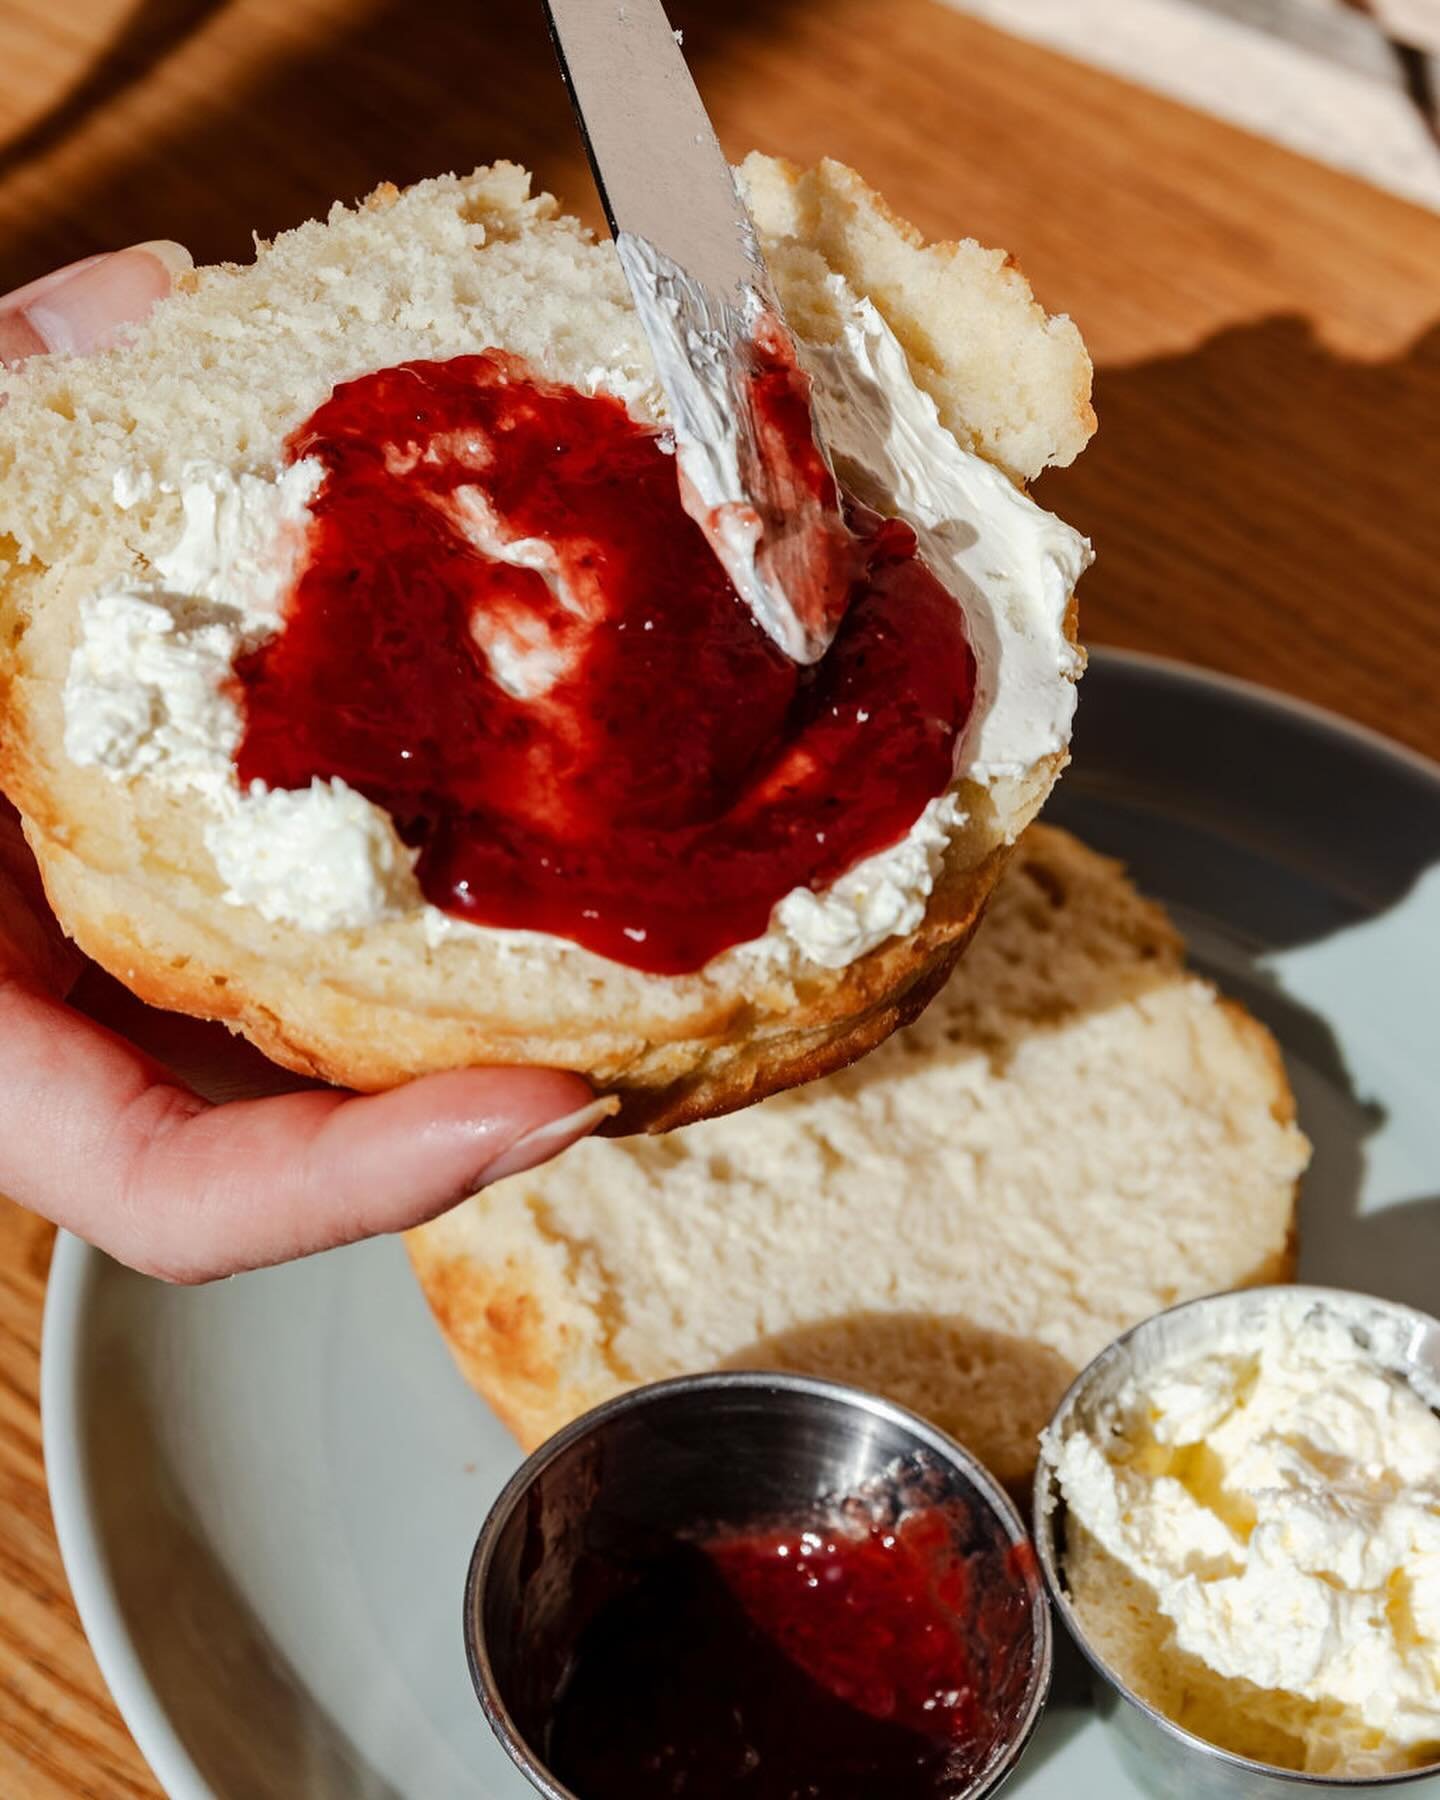 SPREAD THE JAM, SPREAD THE NEWS 🍓🗞️🍓🗞️💞💞 our new hours have commenced:

we&rsquo;re open 7 days a week now, and the hot biscuits won&rsquo;t stop

9AM-4PM (Mon-Fri)
8AM-4PM (Sat-Sun)

Happy Hour is now: 2-4PM (Mon-Fri)

Thank you so much for al